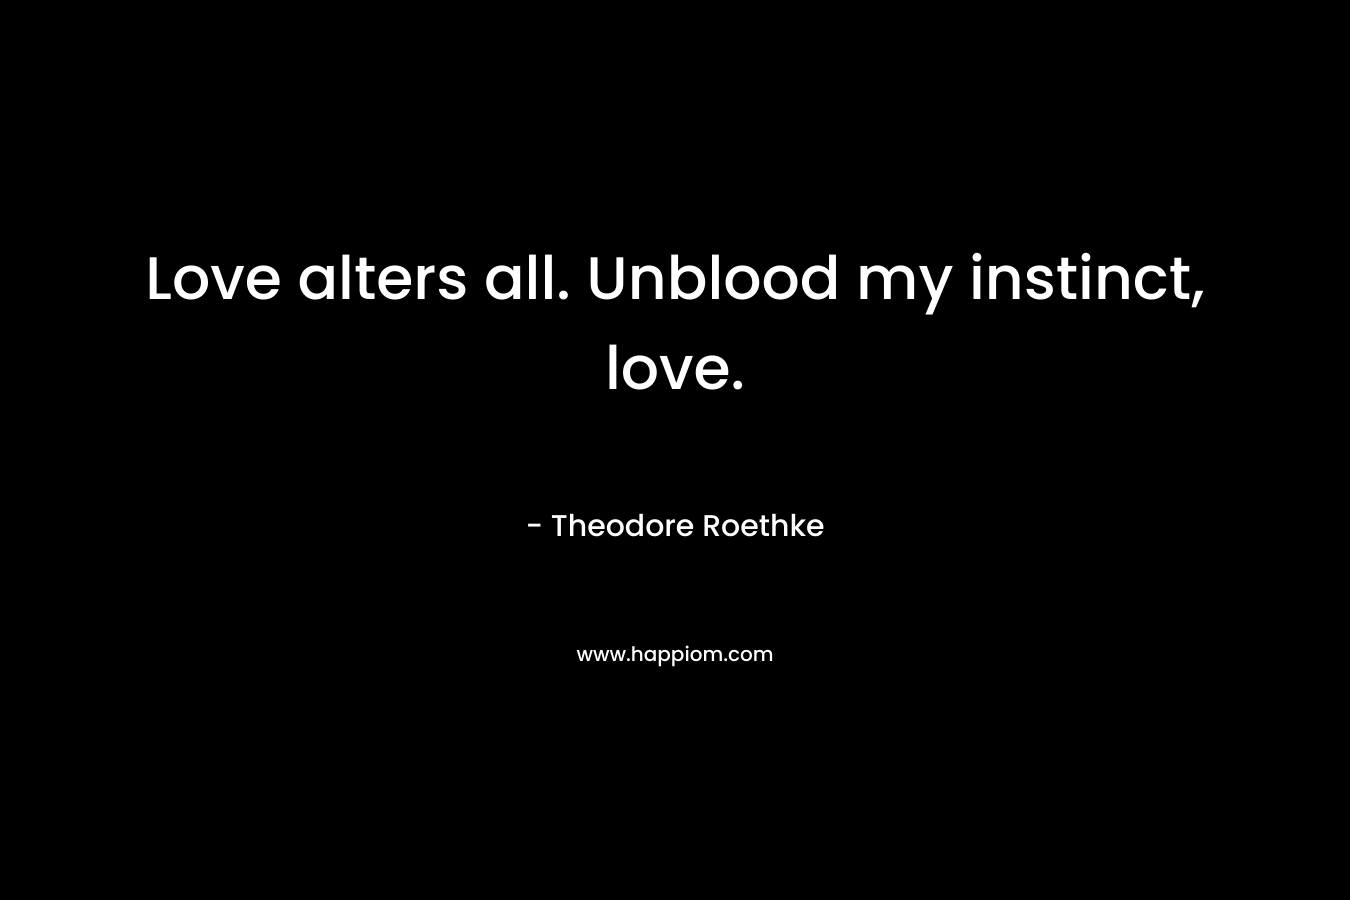 Love alters all. Unblood my instinct, love.